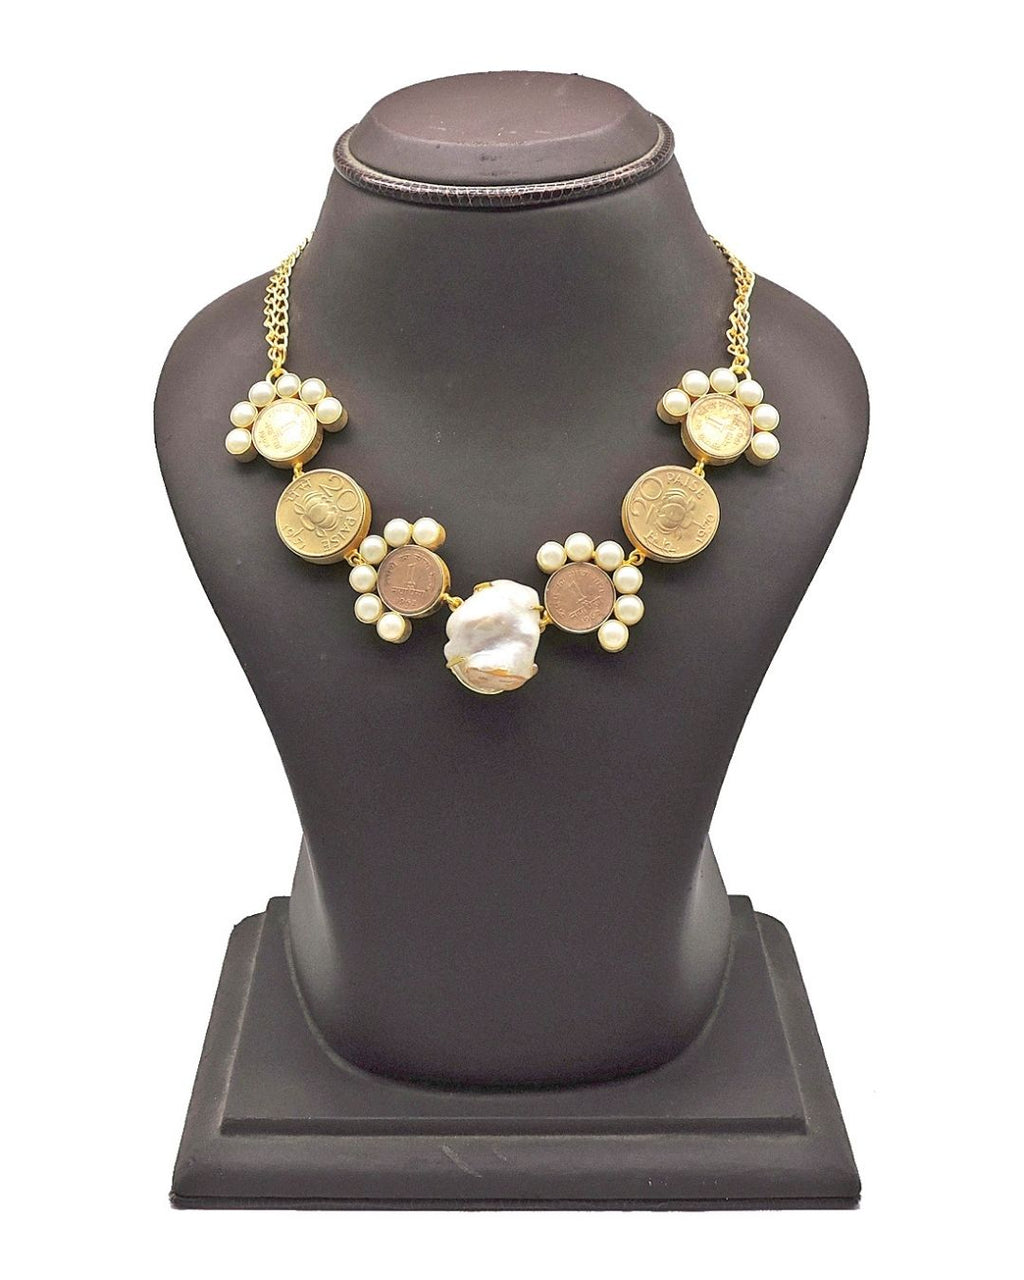 Coin & Pearl Necklace - Necklaces - Handcrafted Jewellery - Made in India - Dubai Jewellery, Fashion & Lifestyle - Dori